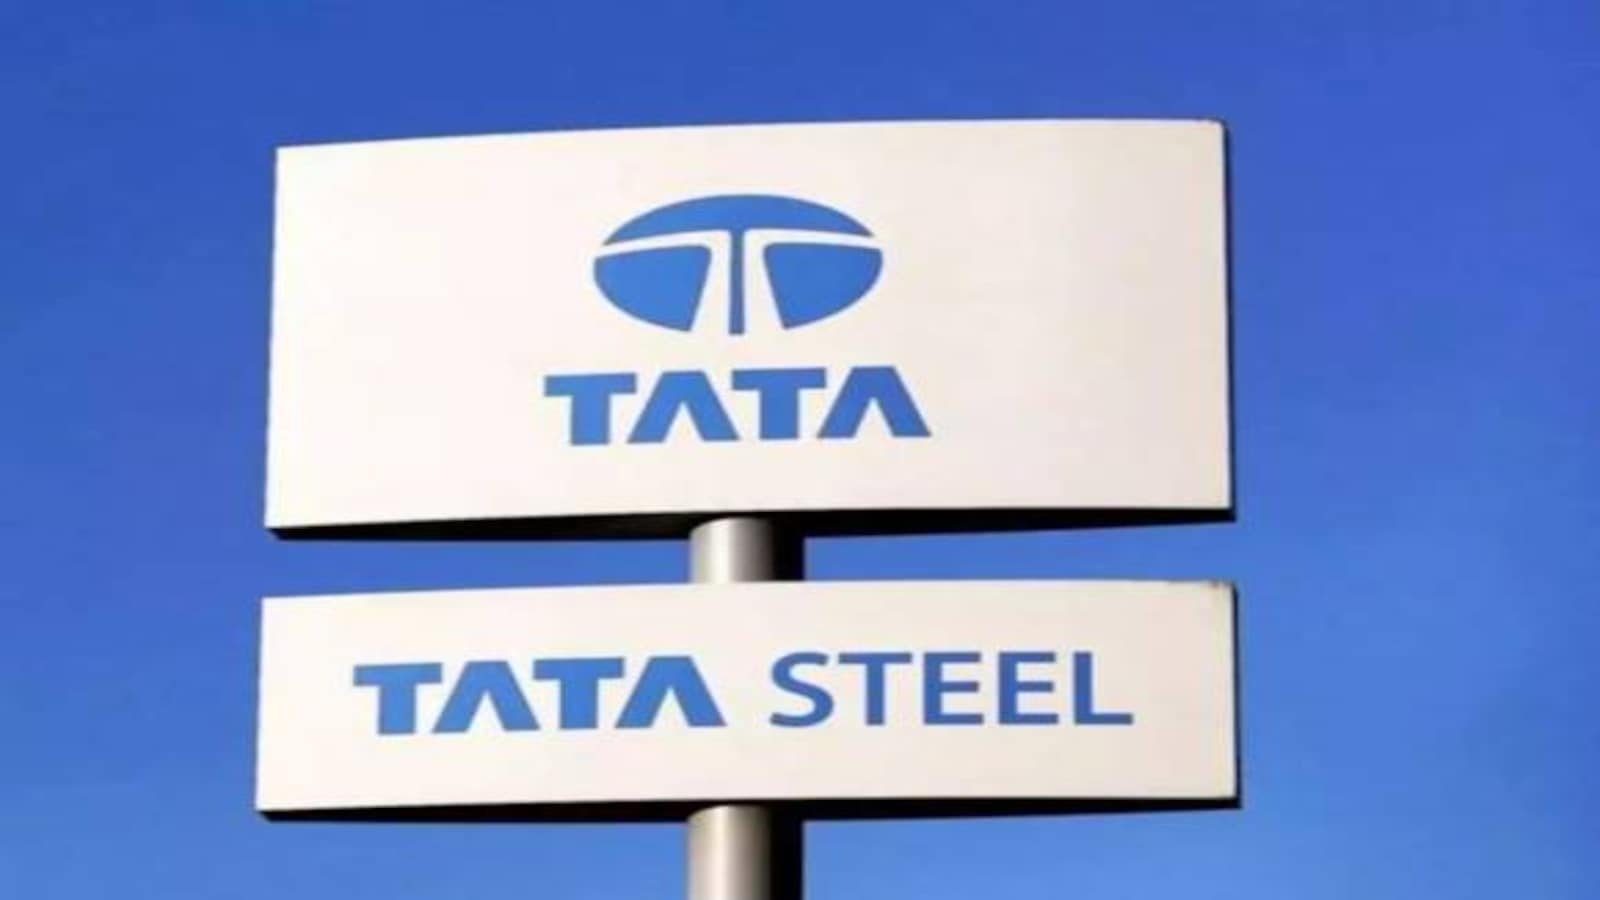 European blues may have driven Tata Steel into red in Sept quarter